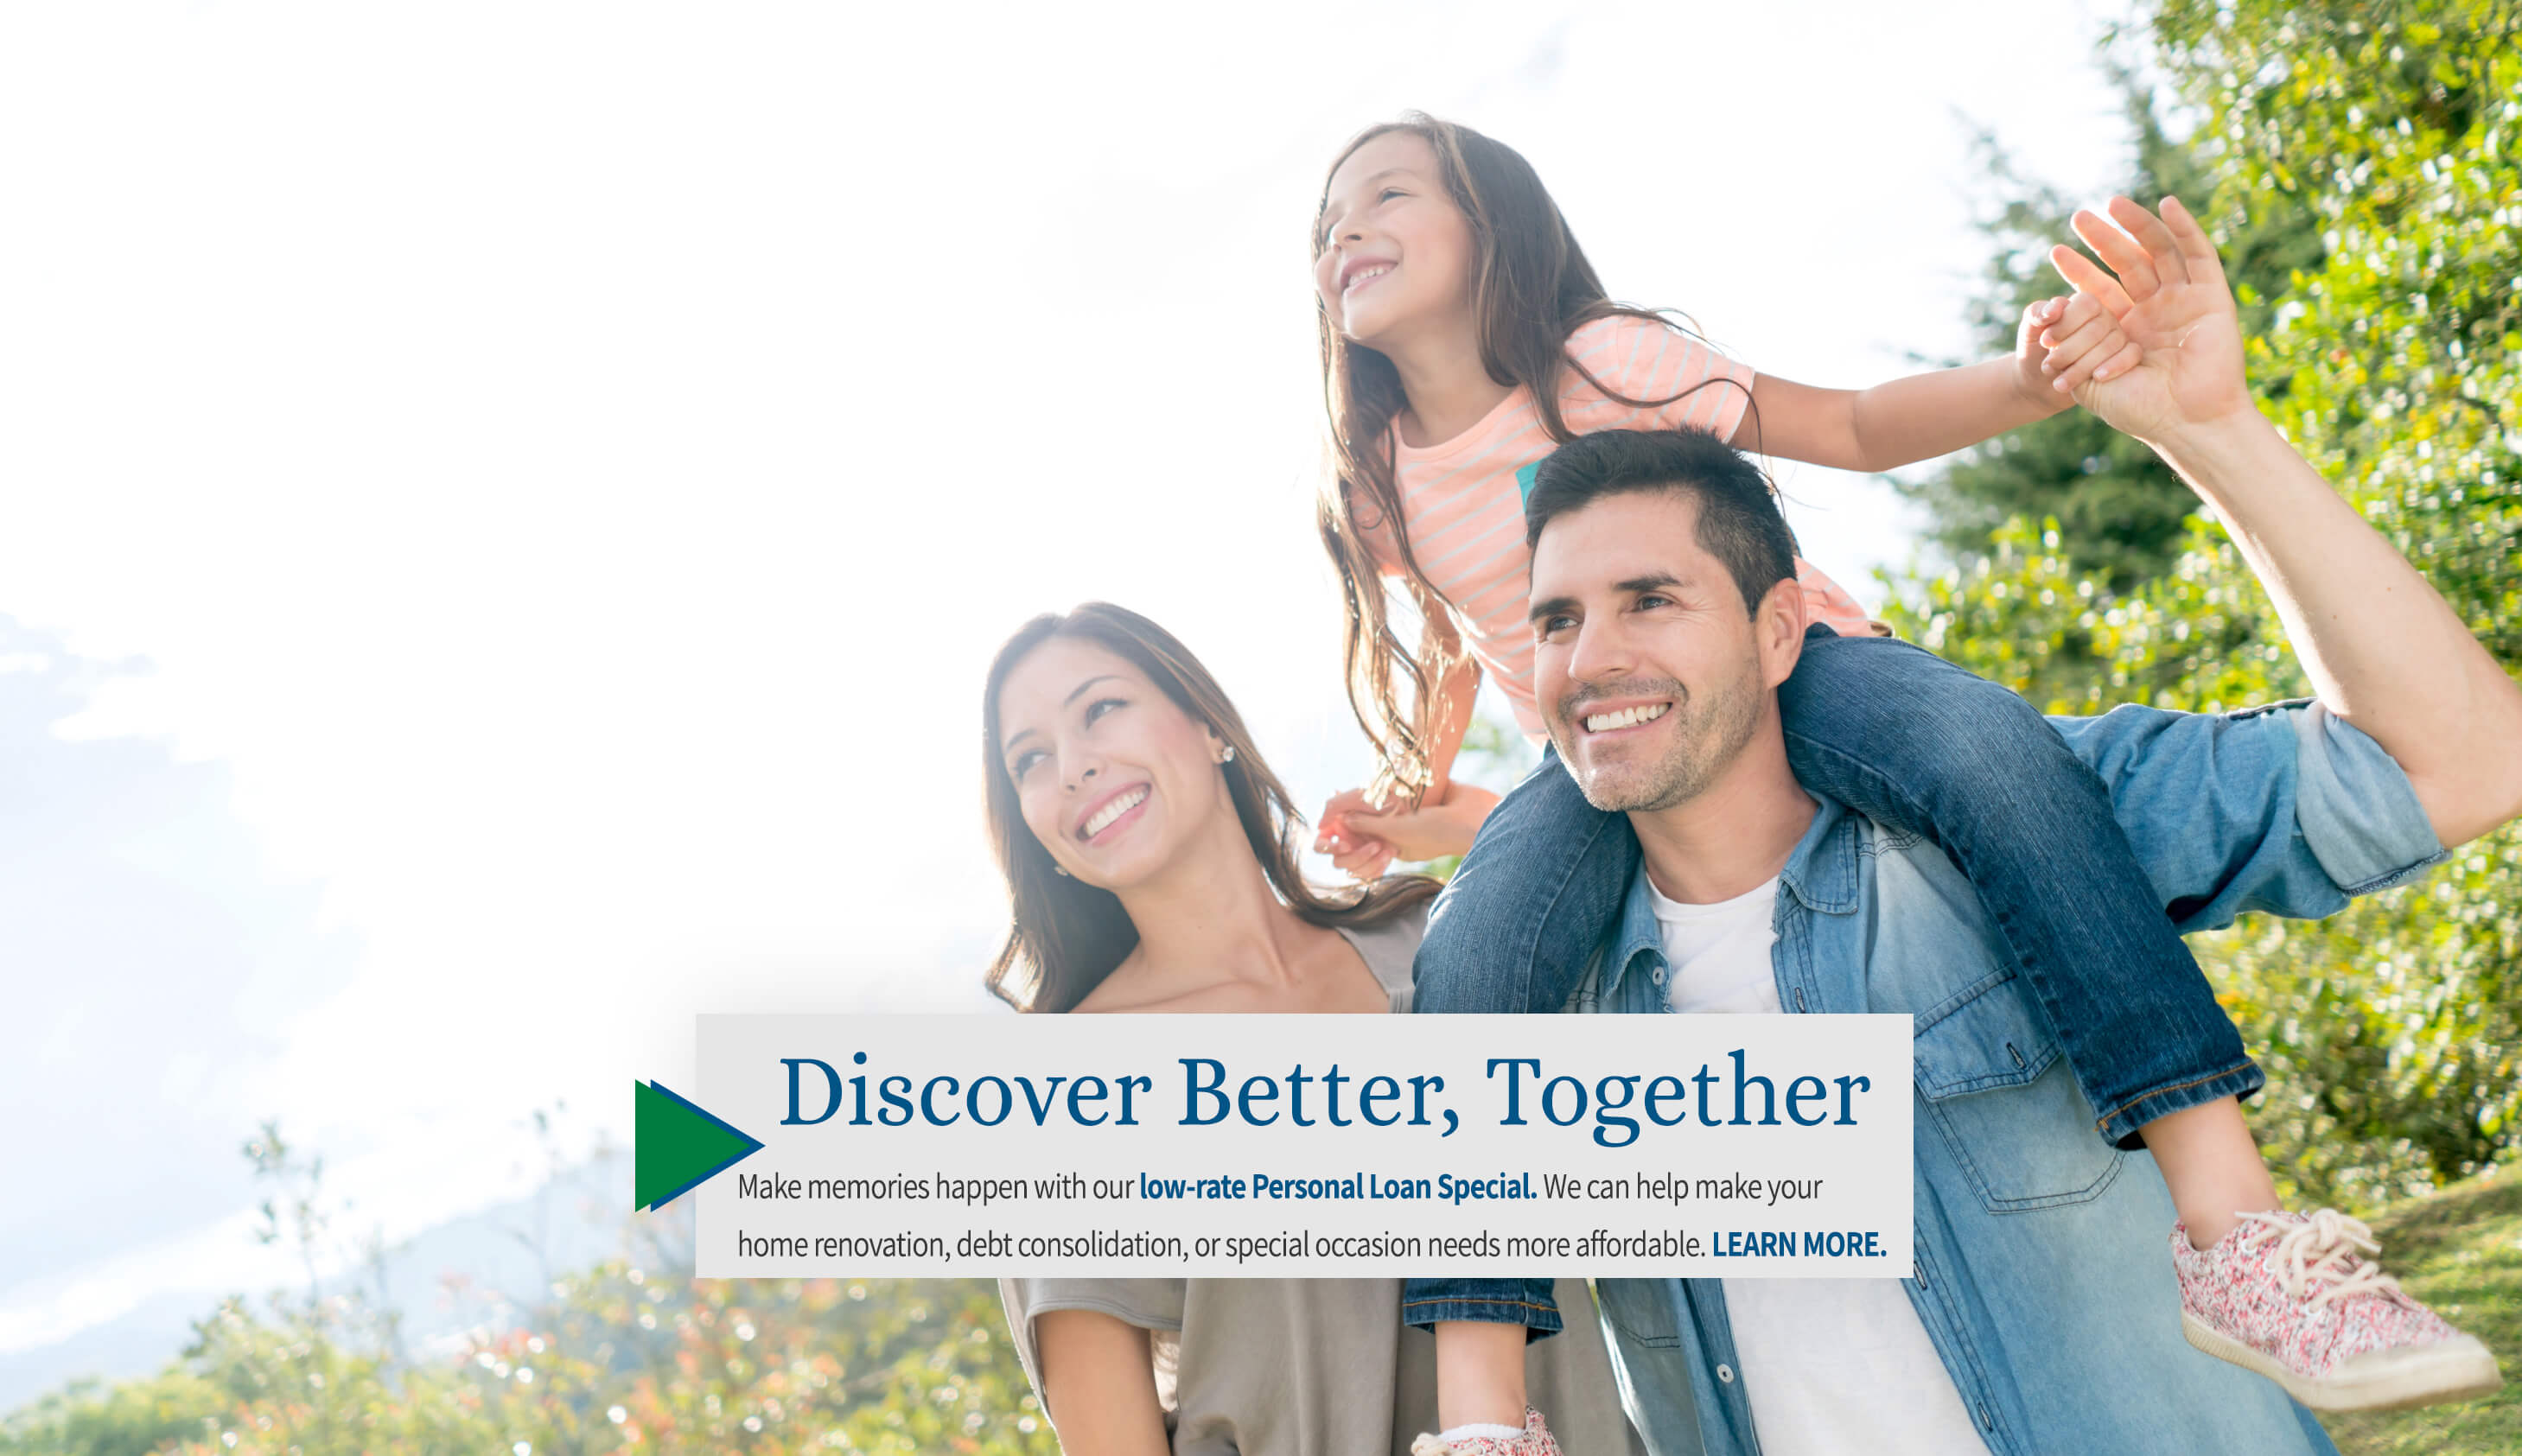 Discover better, Together Make memories happen with our low-rate personal loan special. We can help make your home renovation, debt consolidation, or special occasion needs more affordable. Learn more.